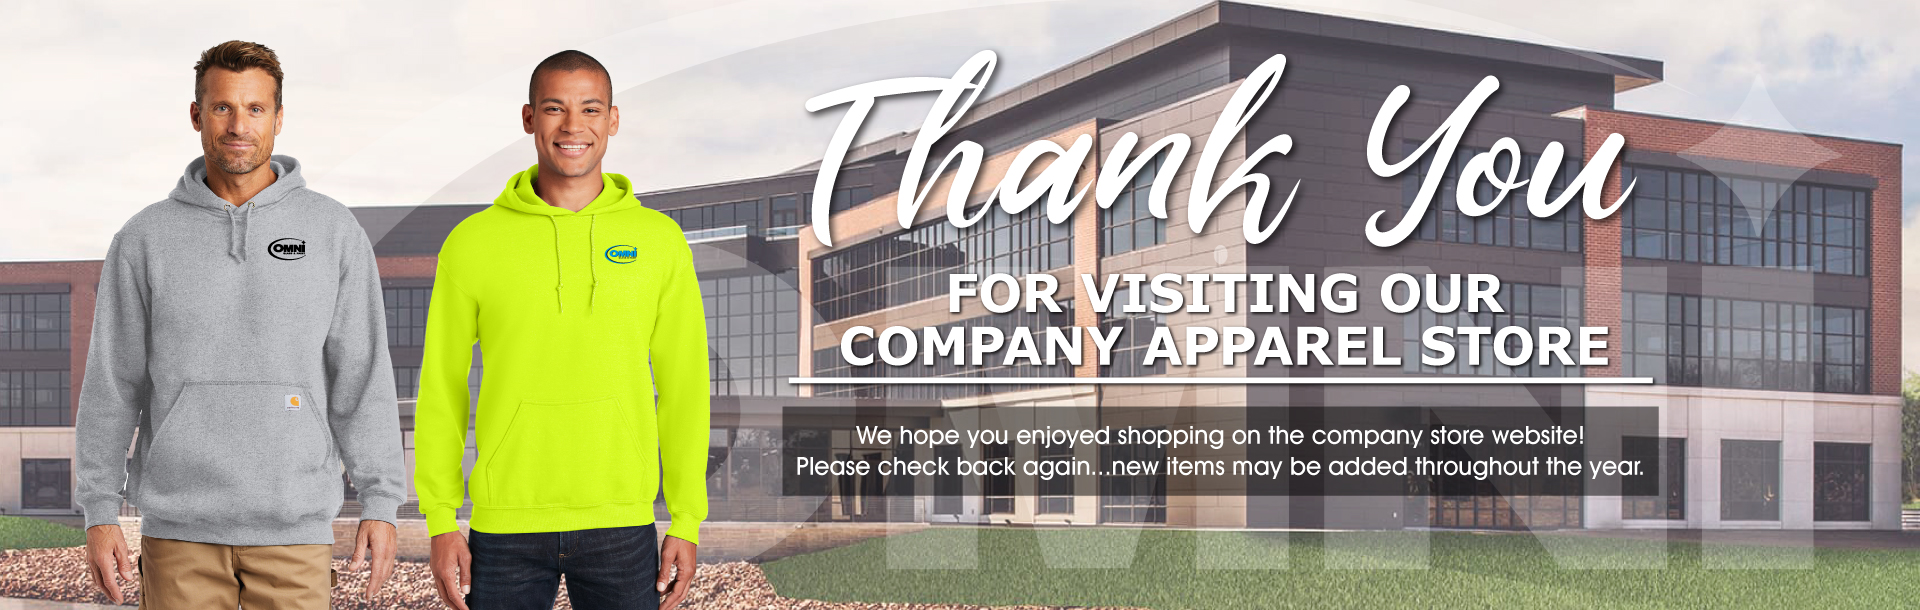 Thank you for visiting our company apparel store.